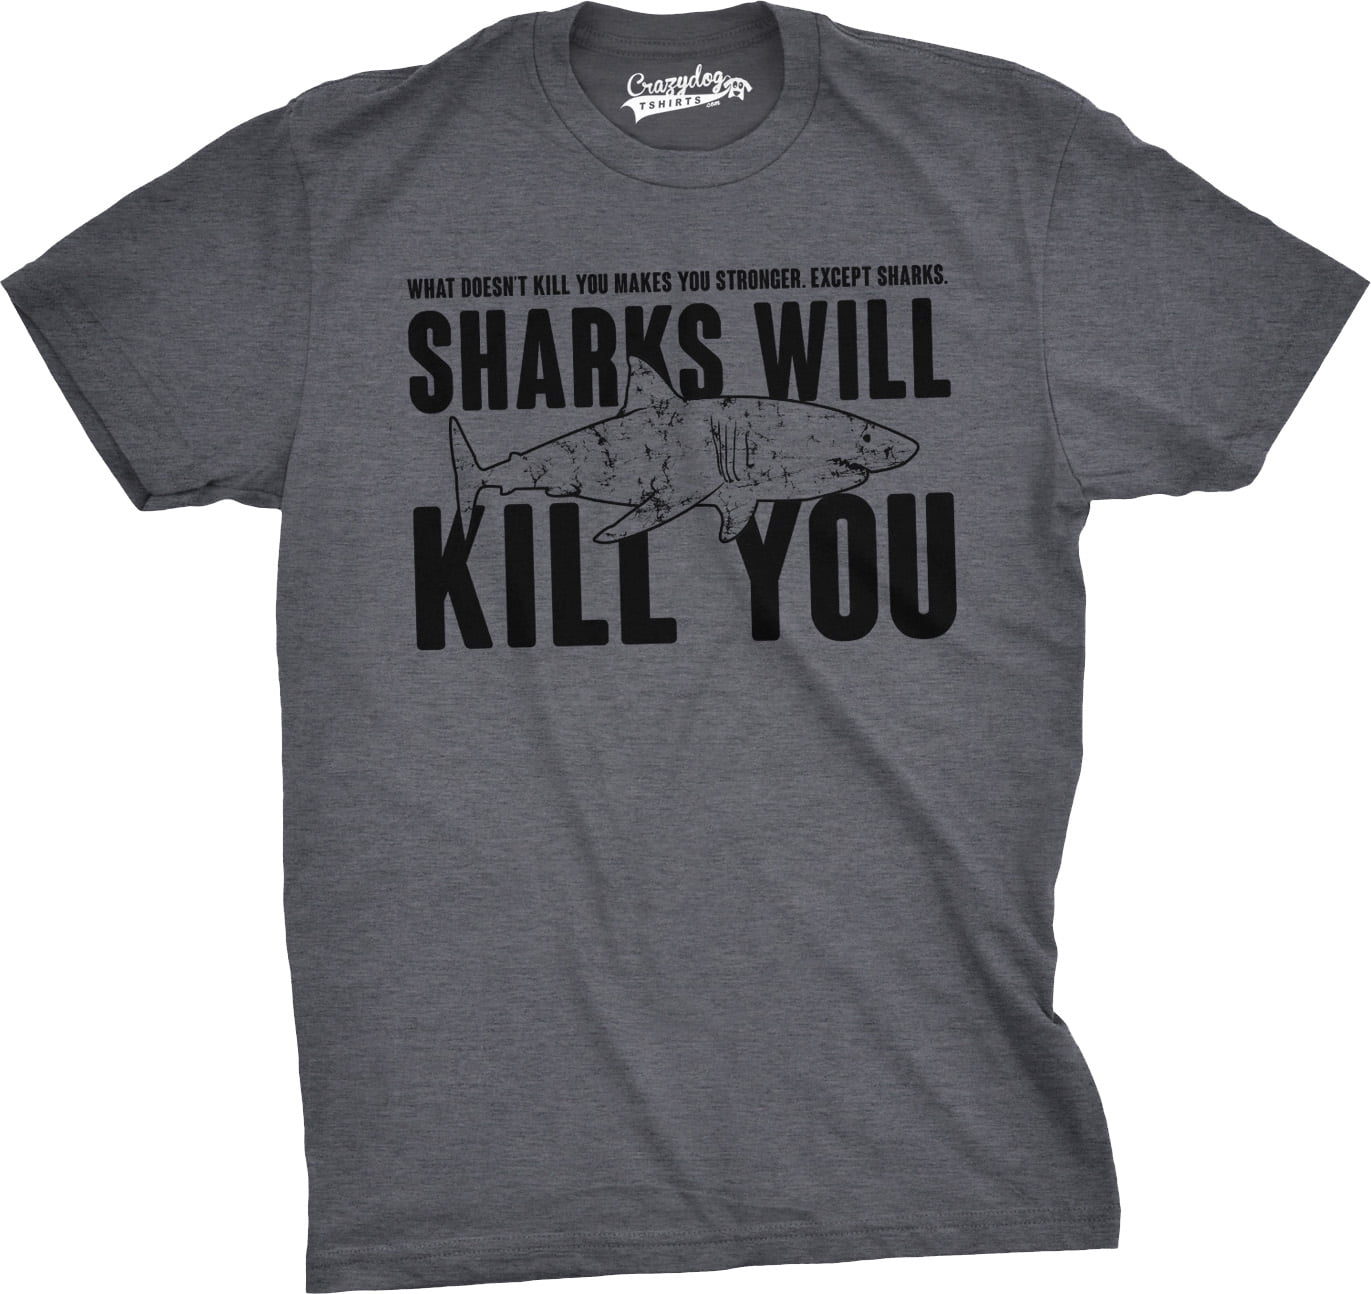 Mens Sharks Will Kill You Funny T Shirt Sarcasm Novelty Offensive Tee for Guys